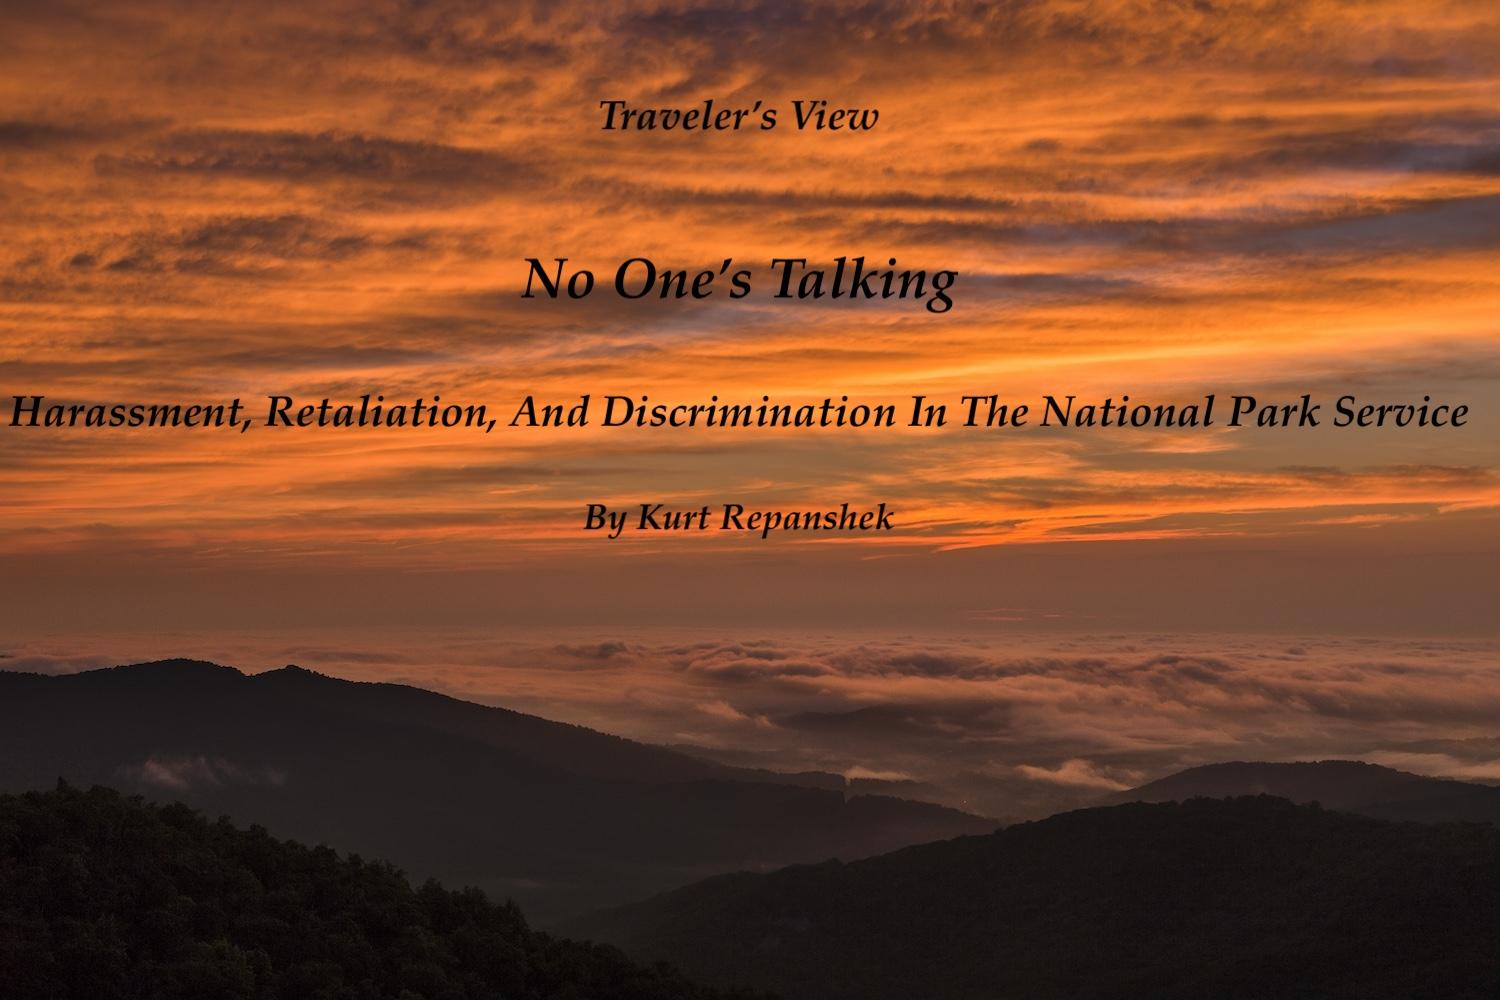 Harassment, Retaliation, and Discrimination In The National Park Service